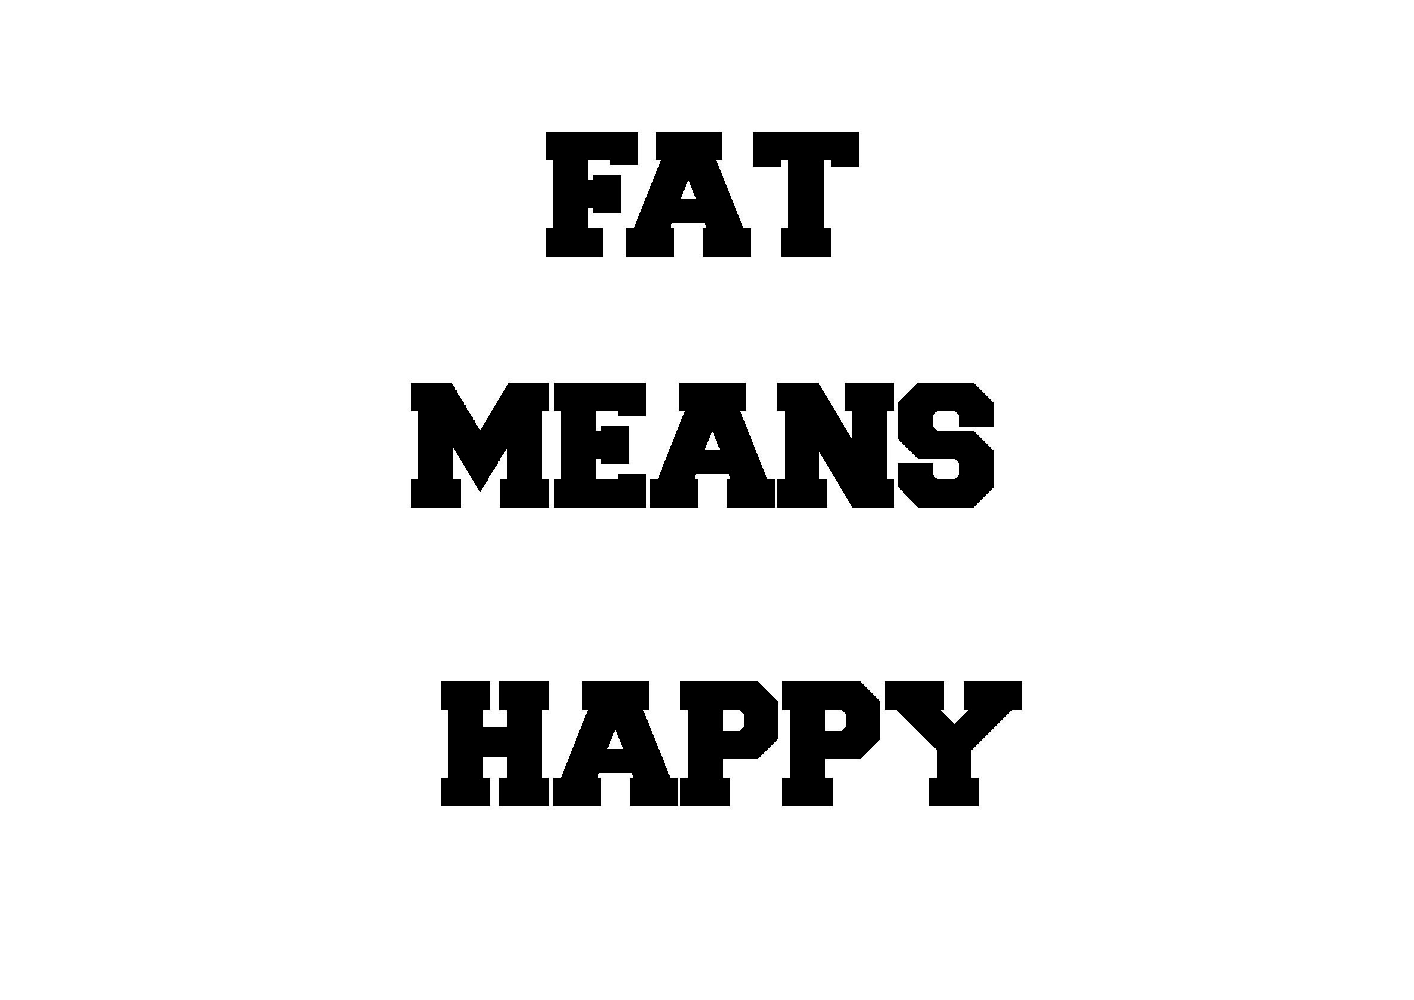 To be happy means. Fat mean.